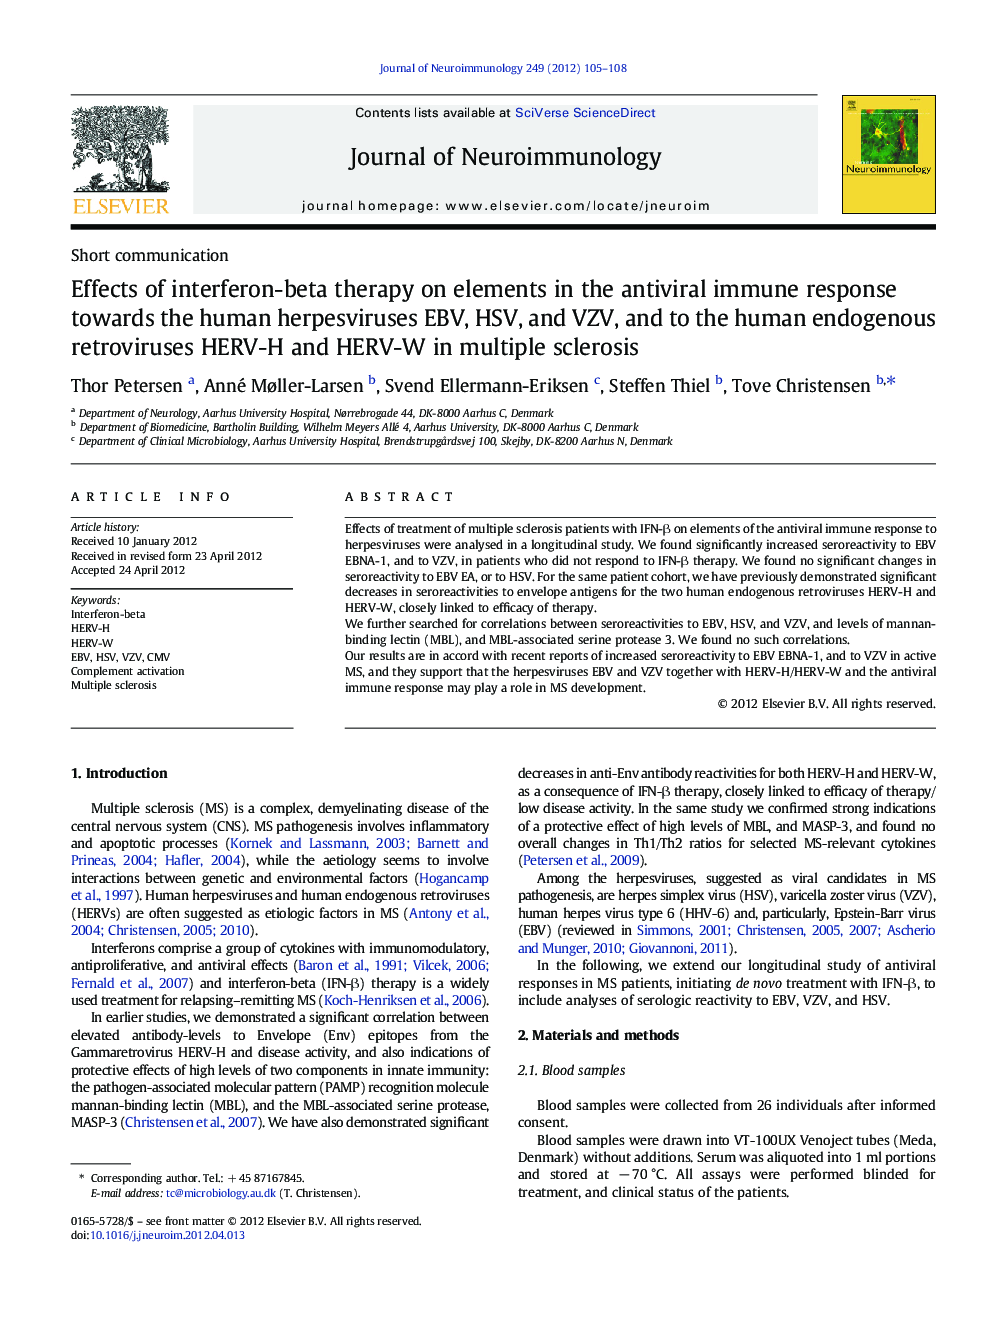 Effects of interferon-beta therapy on elements in the antiviral immune response towards the human herpesviruses EBV, HSV, and VZV, and to the human endogenous retroviruses HERV-H and HERV-W in multiple sclerosis